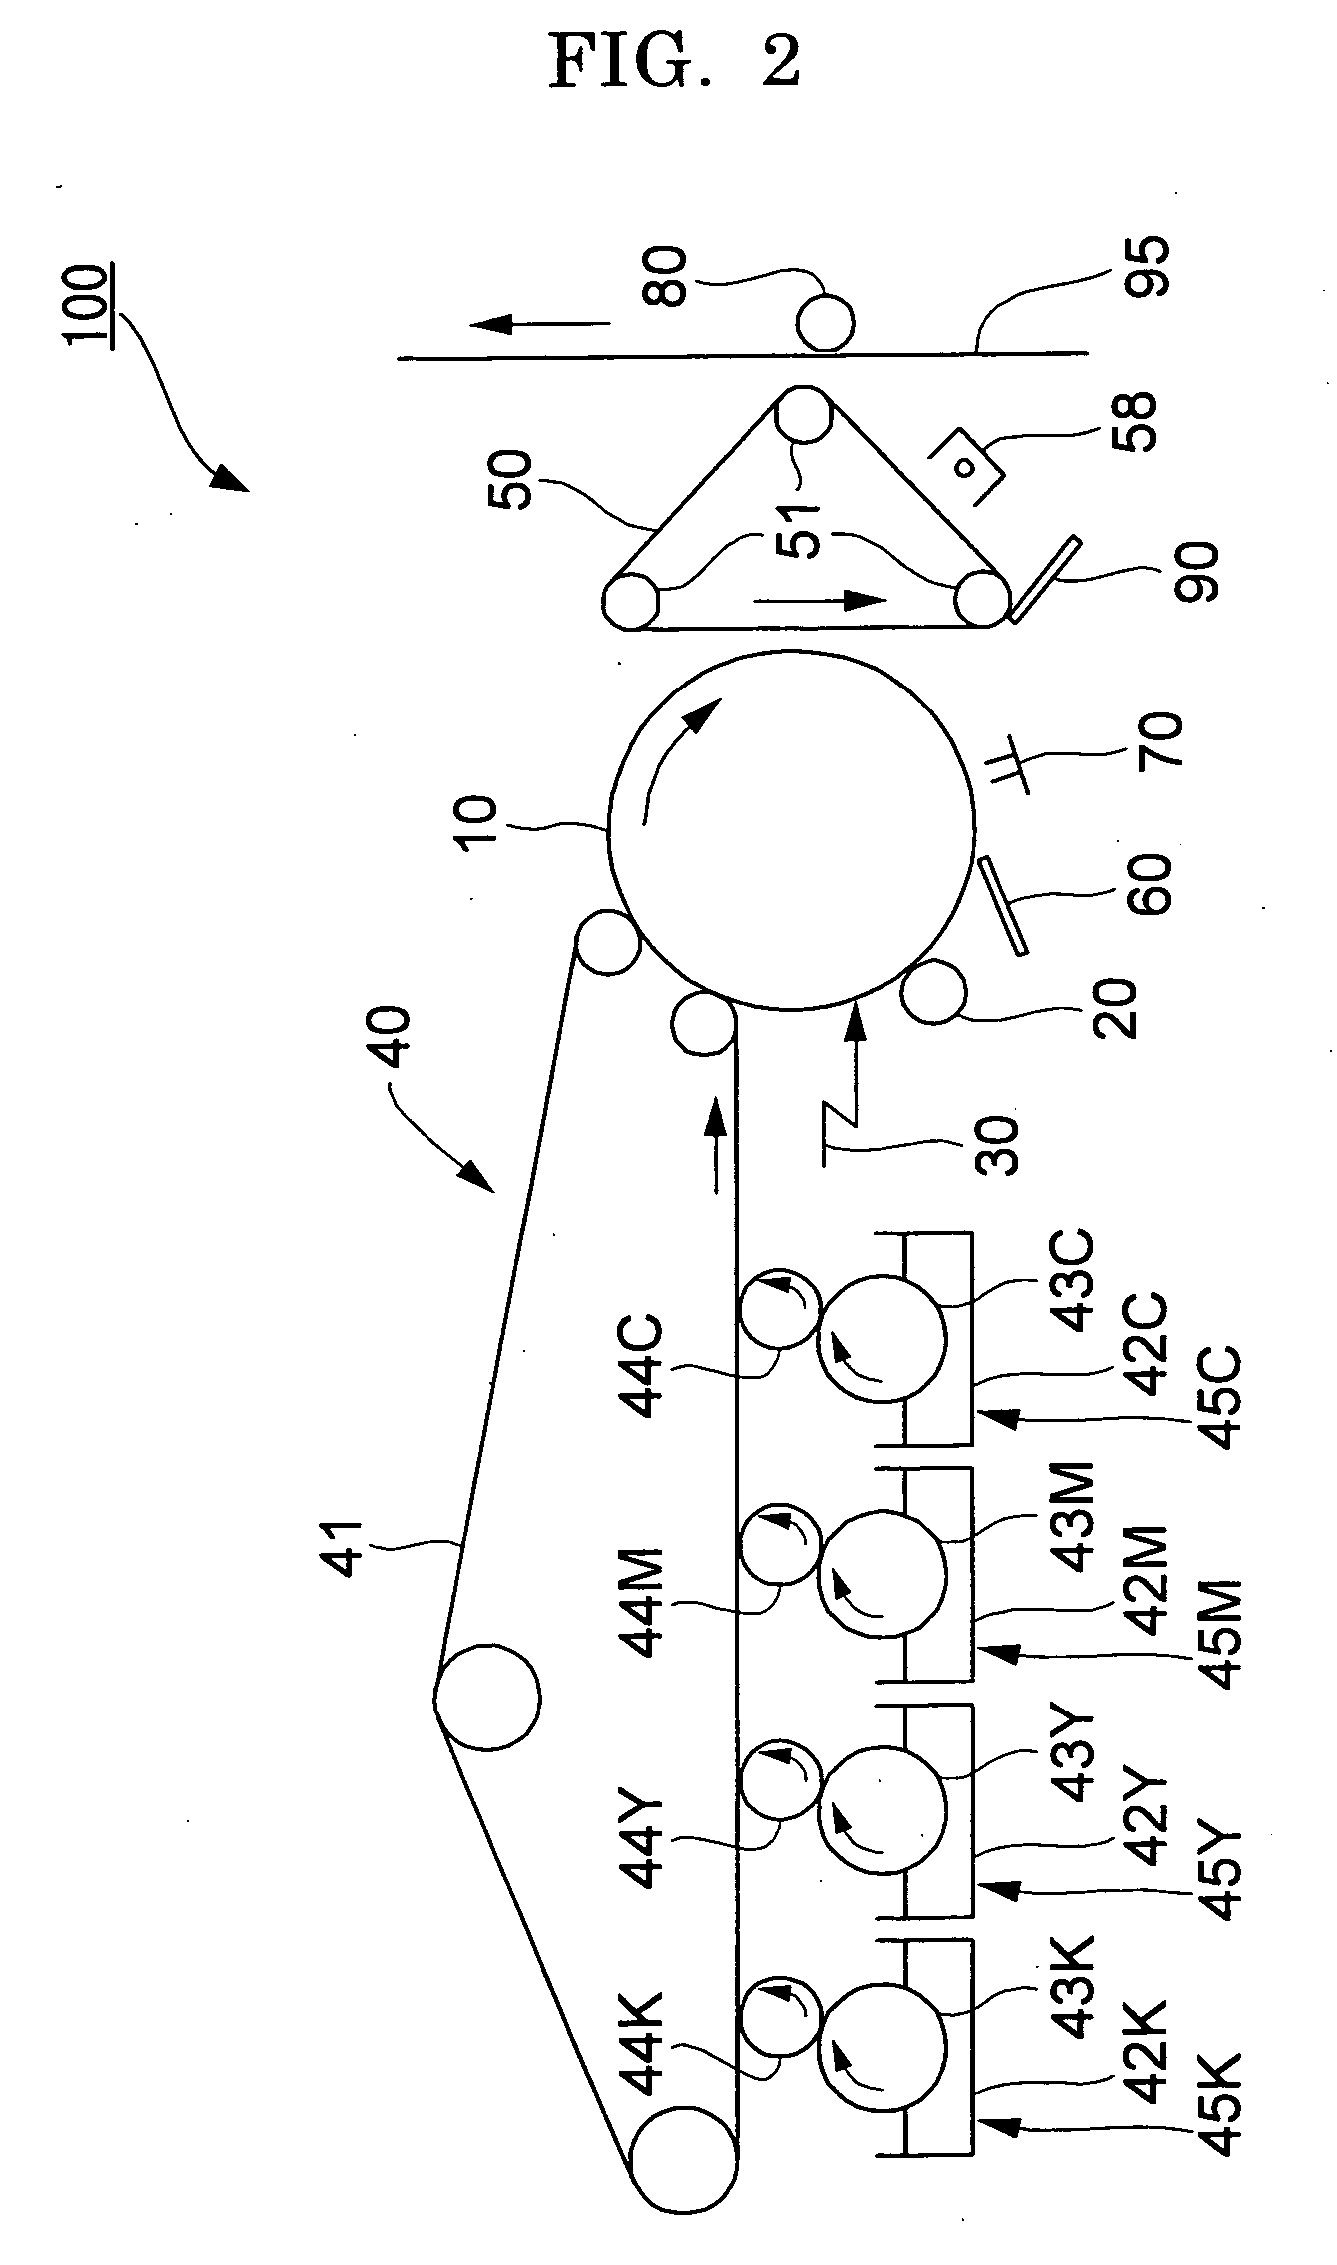 Toner, developer, toner container, process cartridge, image forming apparatus and image forming method